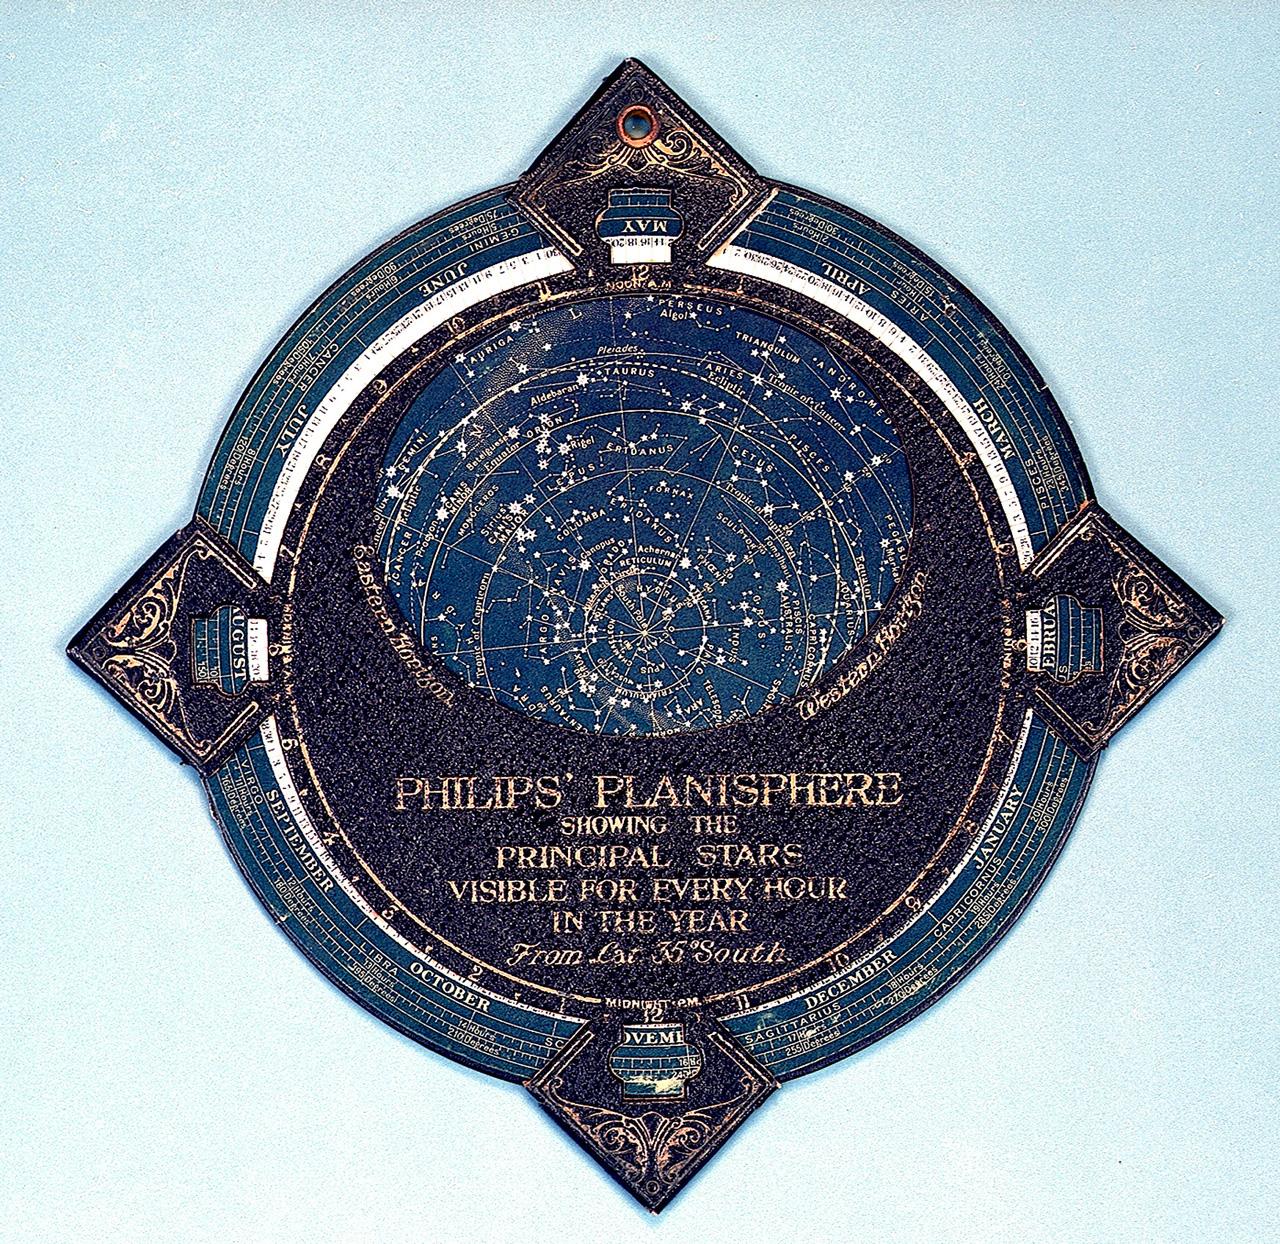 A planisphere which is a circular shape with a smaller crescent shape within it. Forming the other half of the crescent is a star map showing the constellations